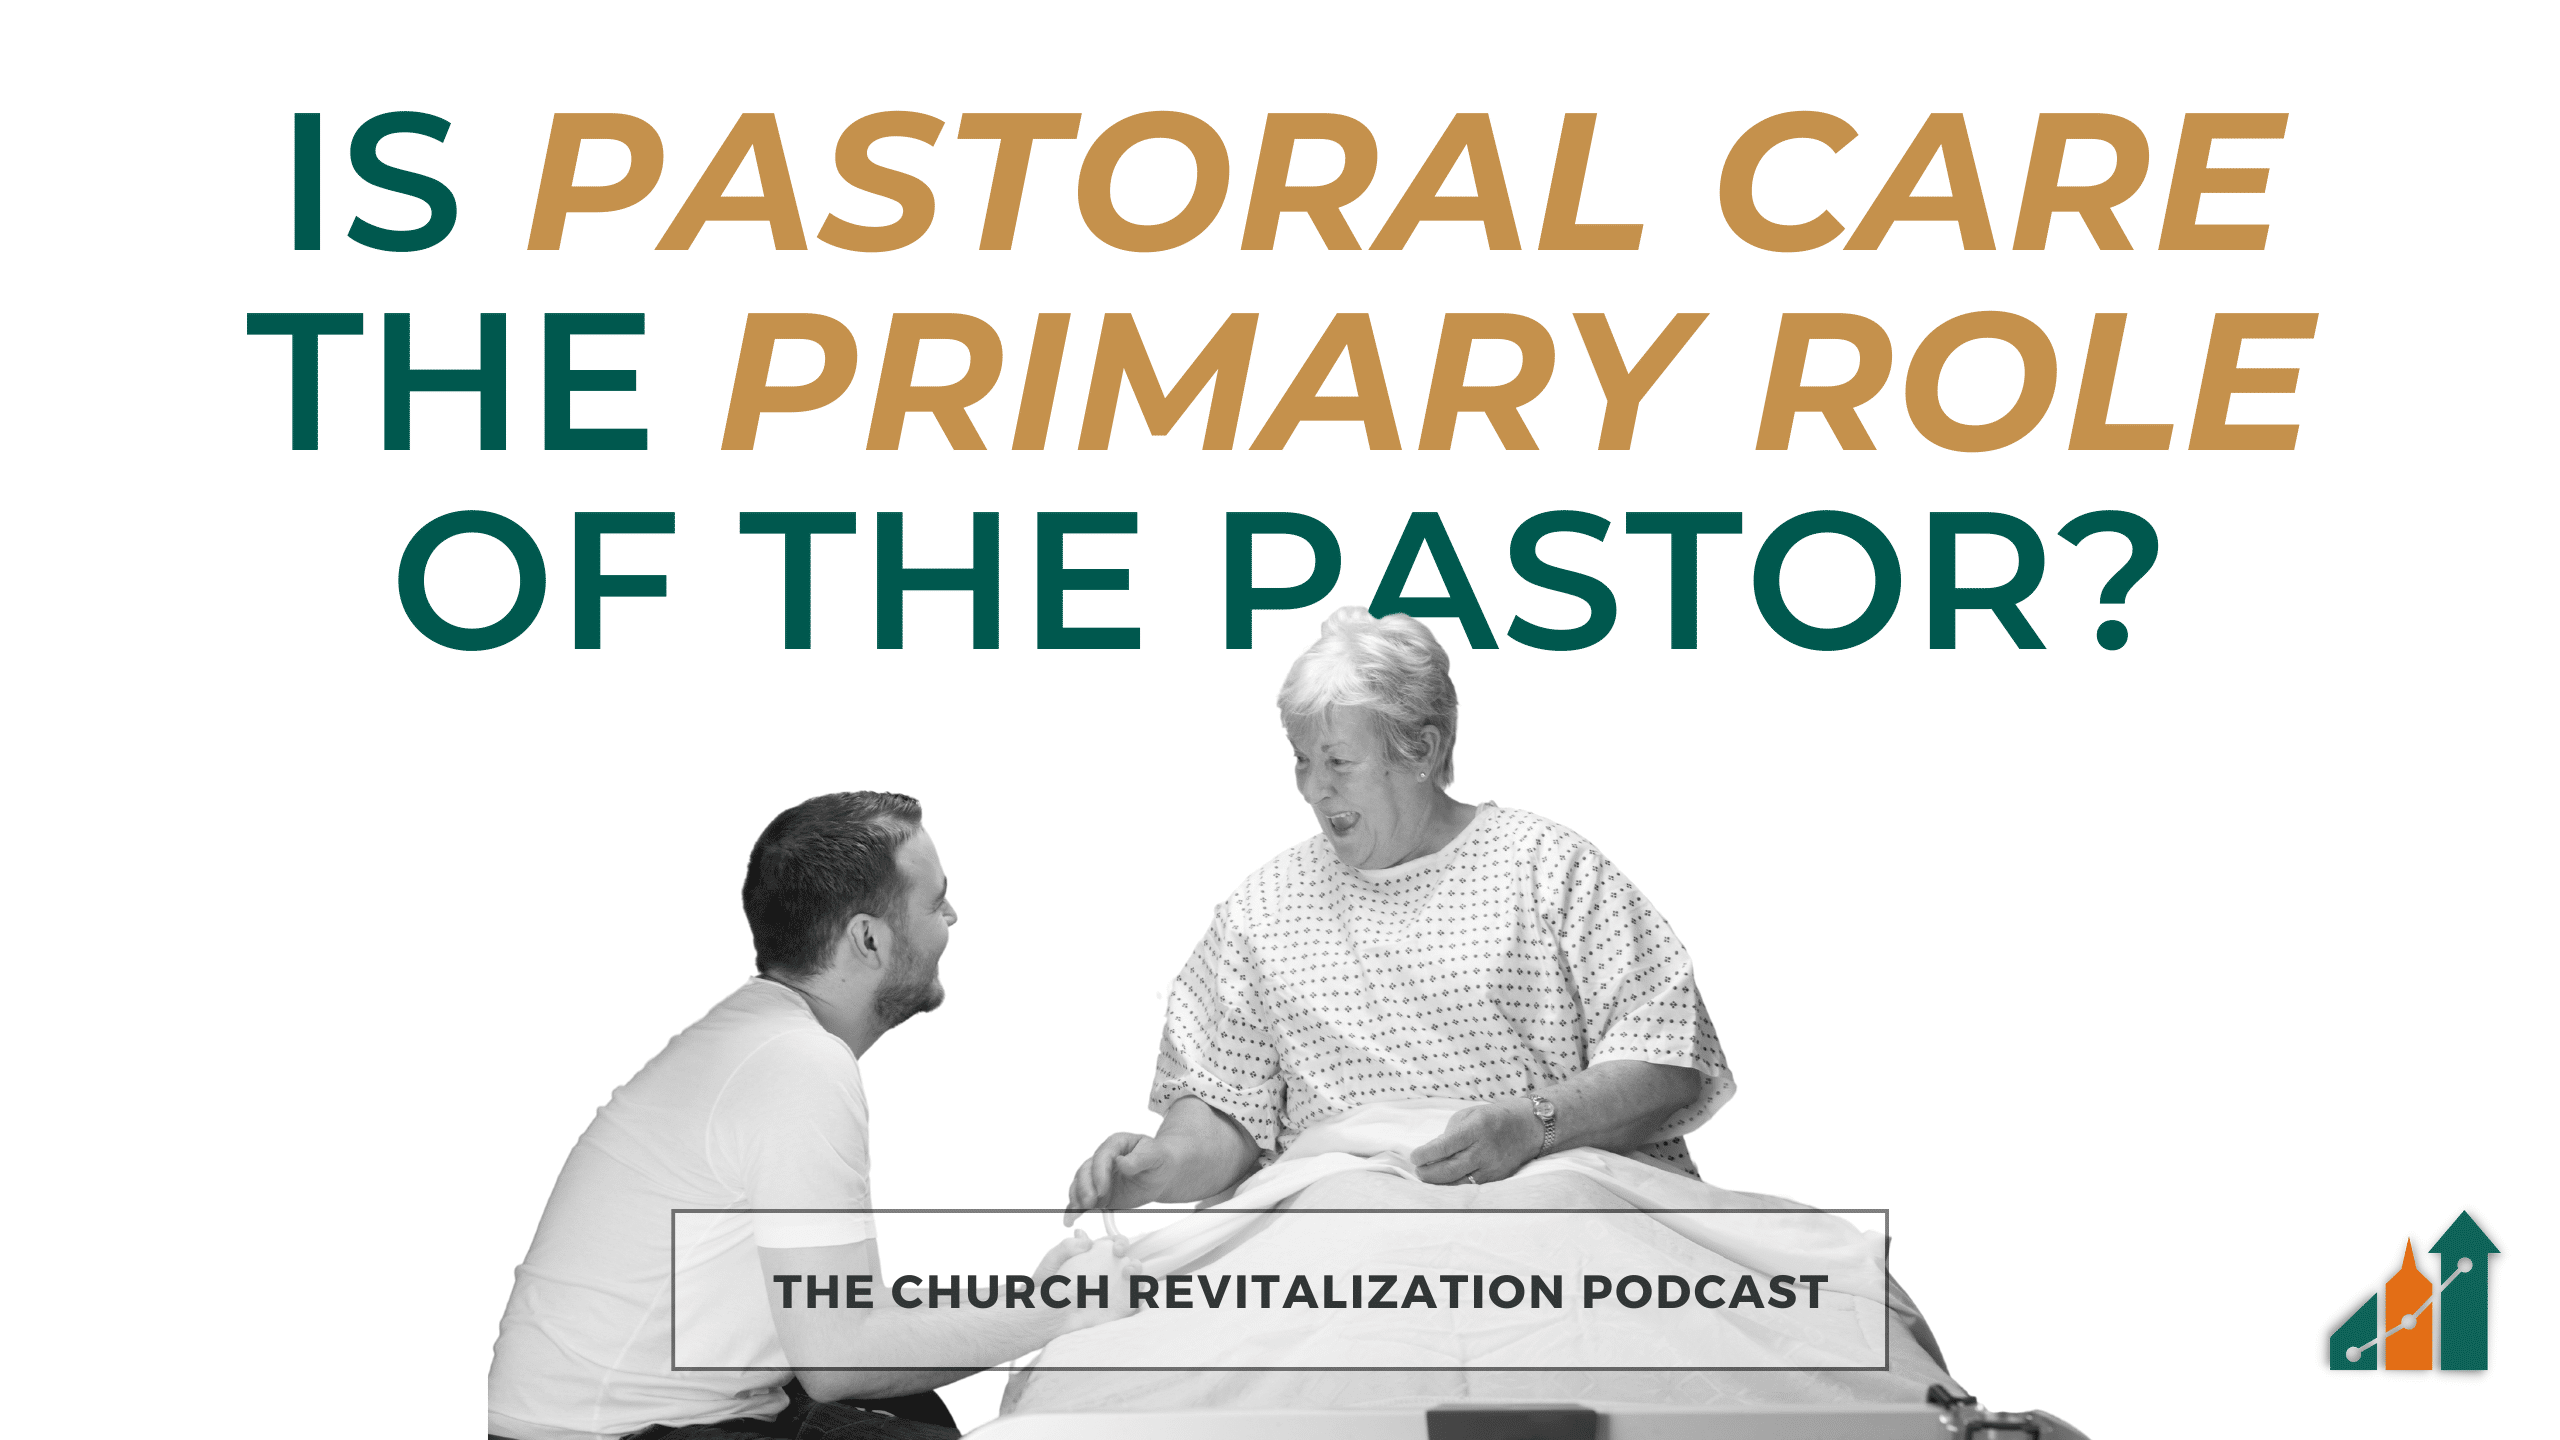 Is Pastoral Care the Primary Role of the Pastor?